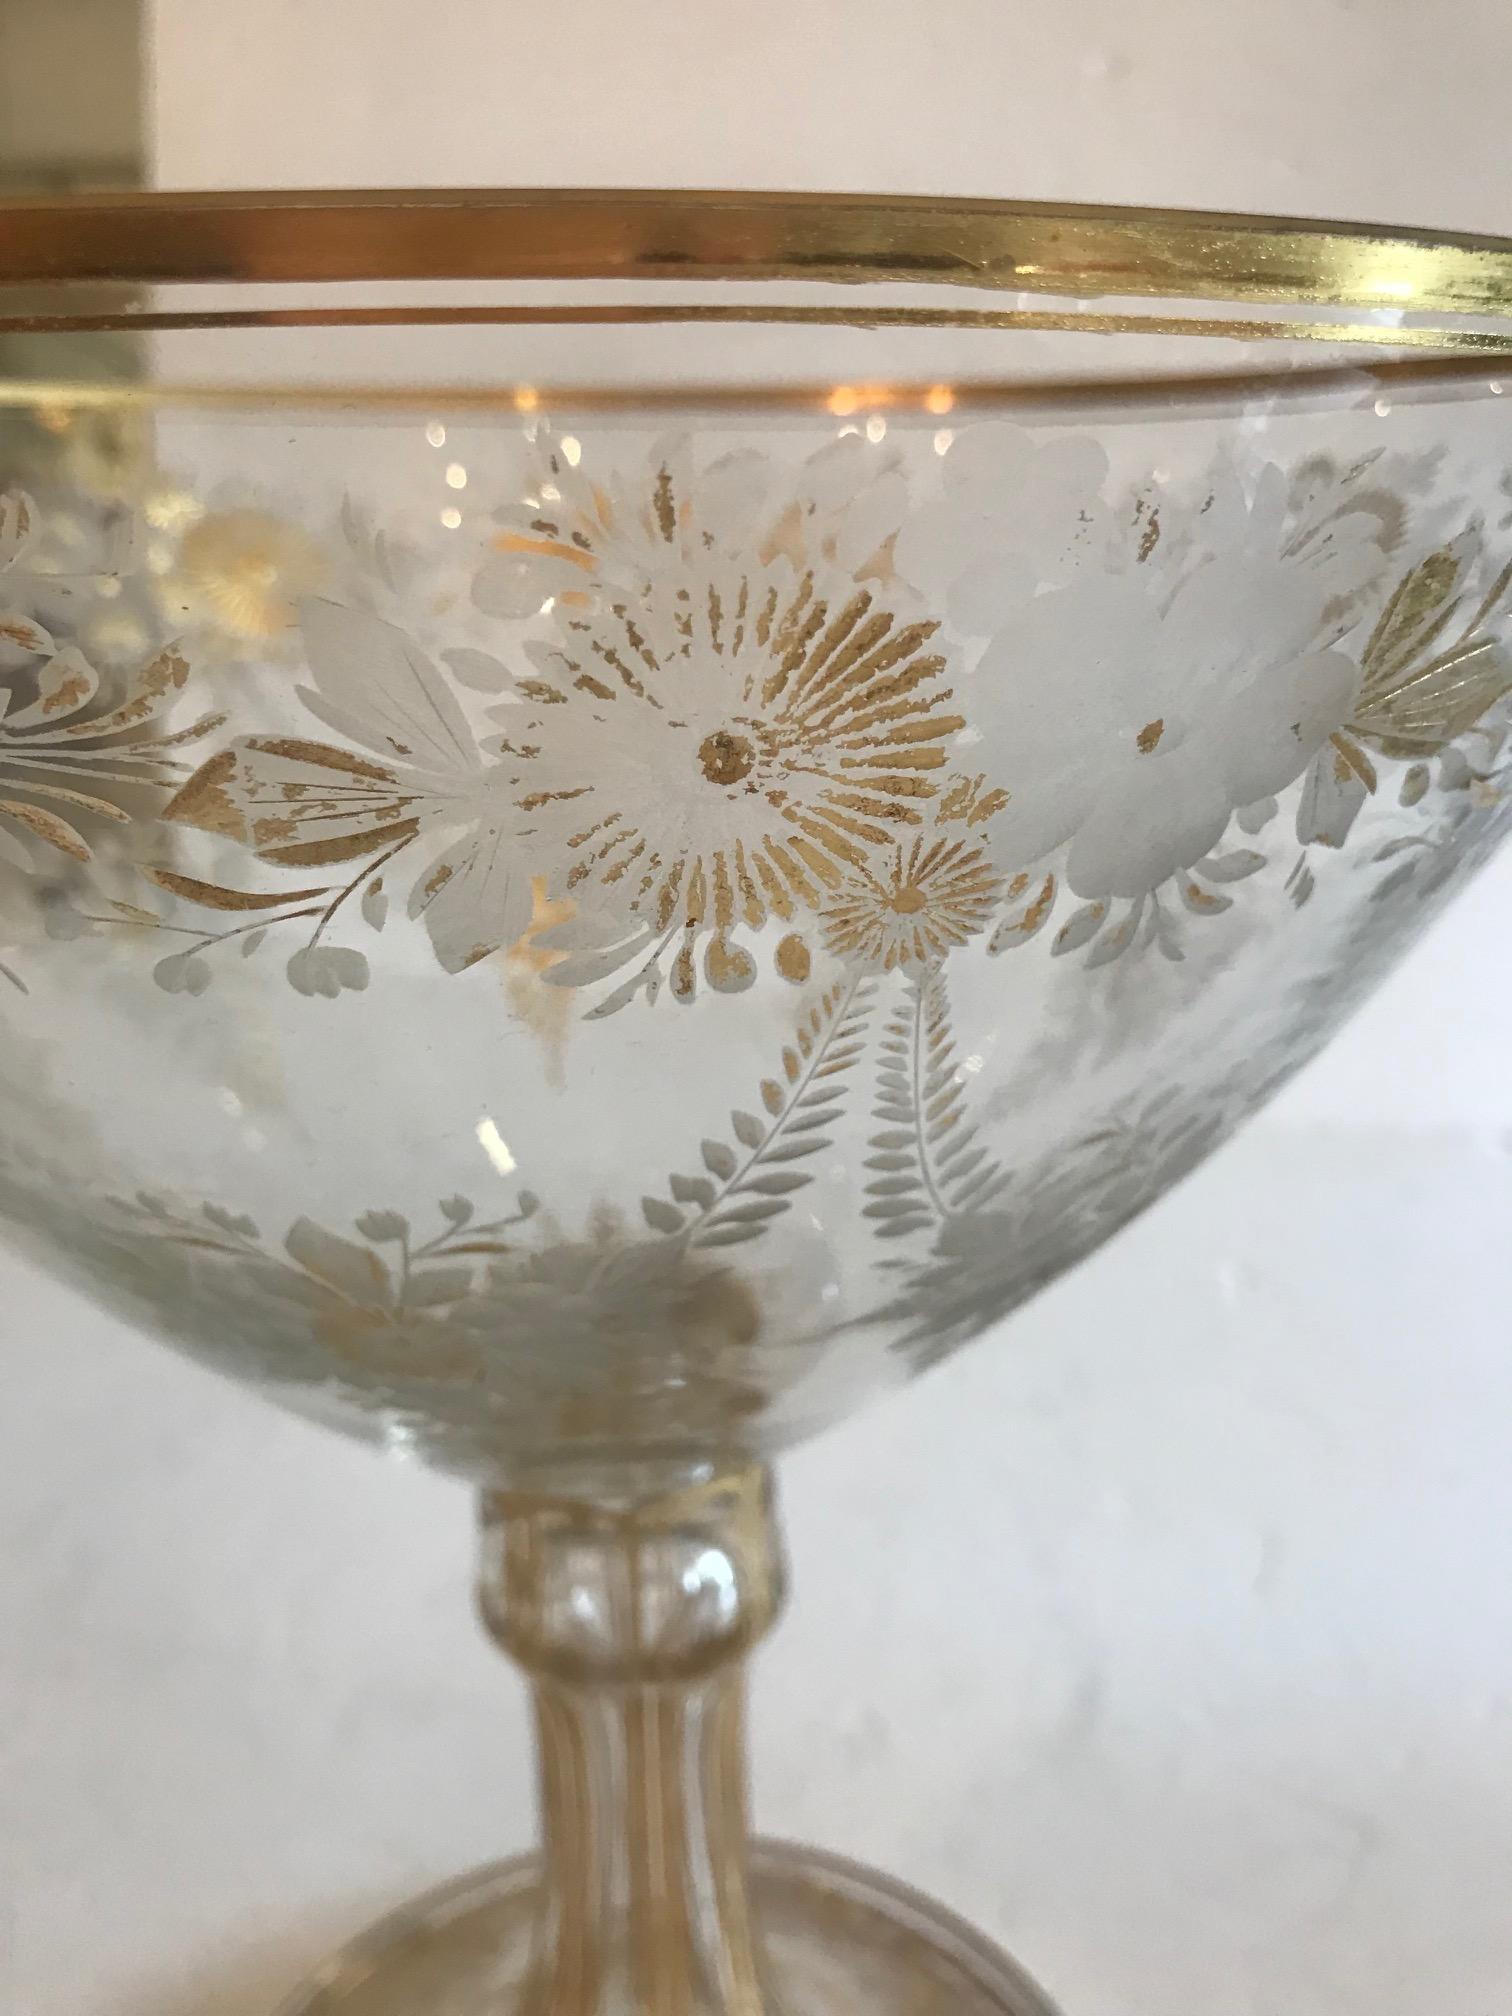 Beautiful French Baccarat antique vessel or centerpiece of etched glass with lovely gold designs. Top Opening 10.25 Diameter
Bottom Base 6.5 Diameter
Some loss of gold.